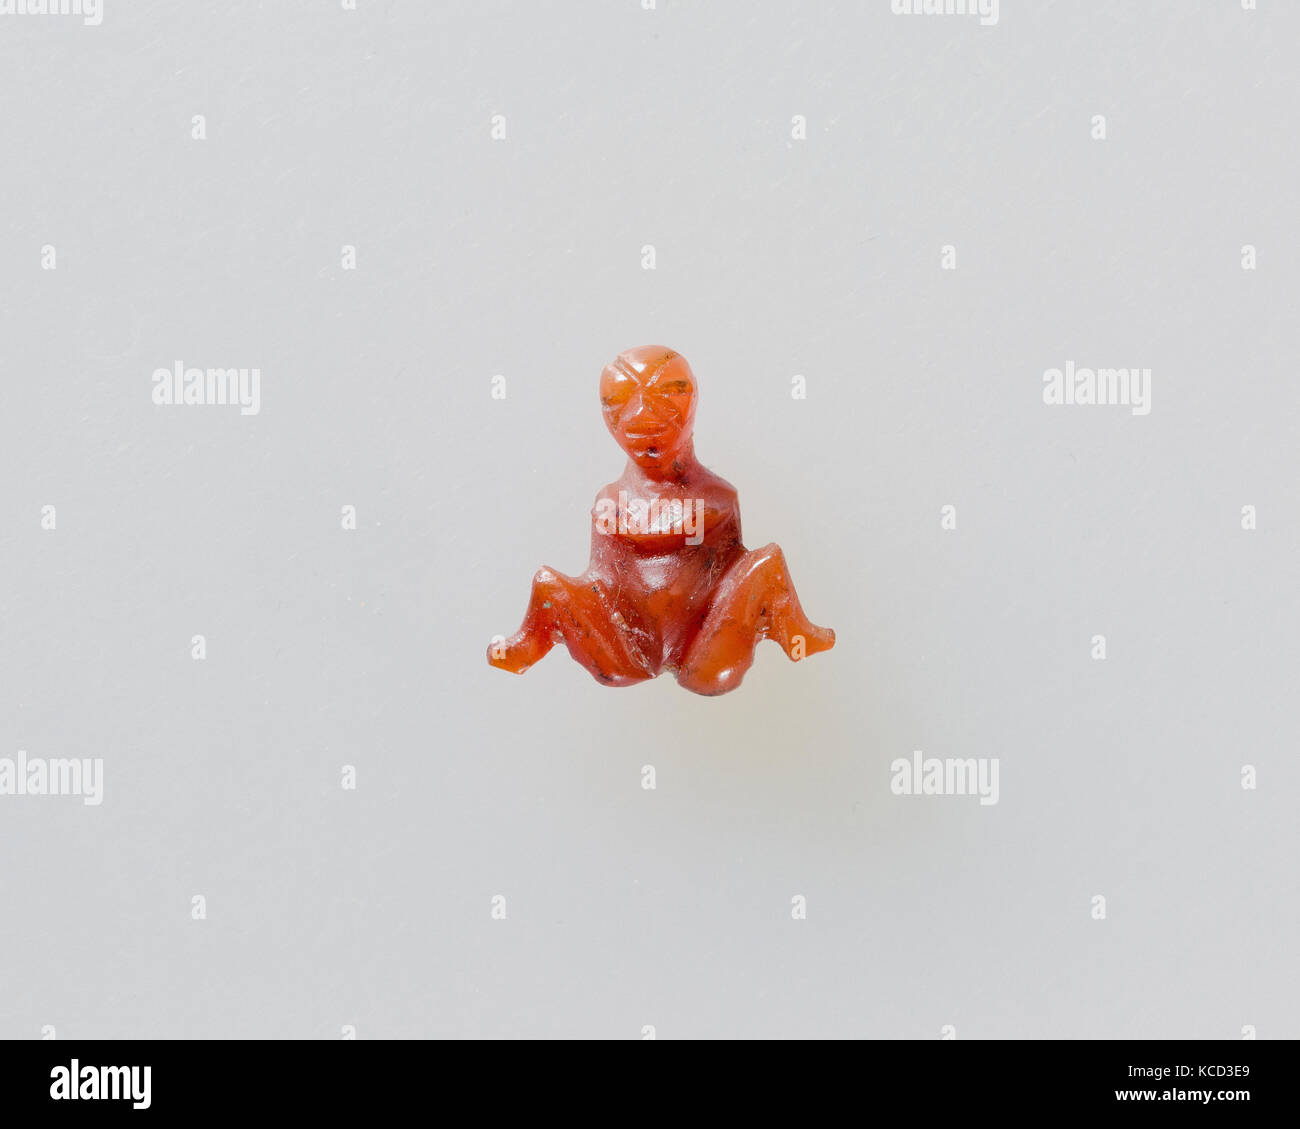 https://c8.alamy.com/comp/KCD3E9/omphale-figure-ptolemaic-or-roman-period-100-bc300-ad-from-egypt-carnelian-KCD3E9.jpg